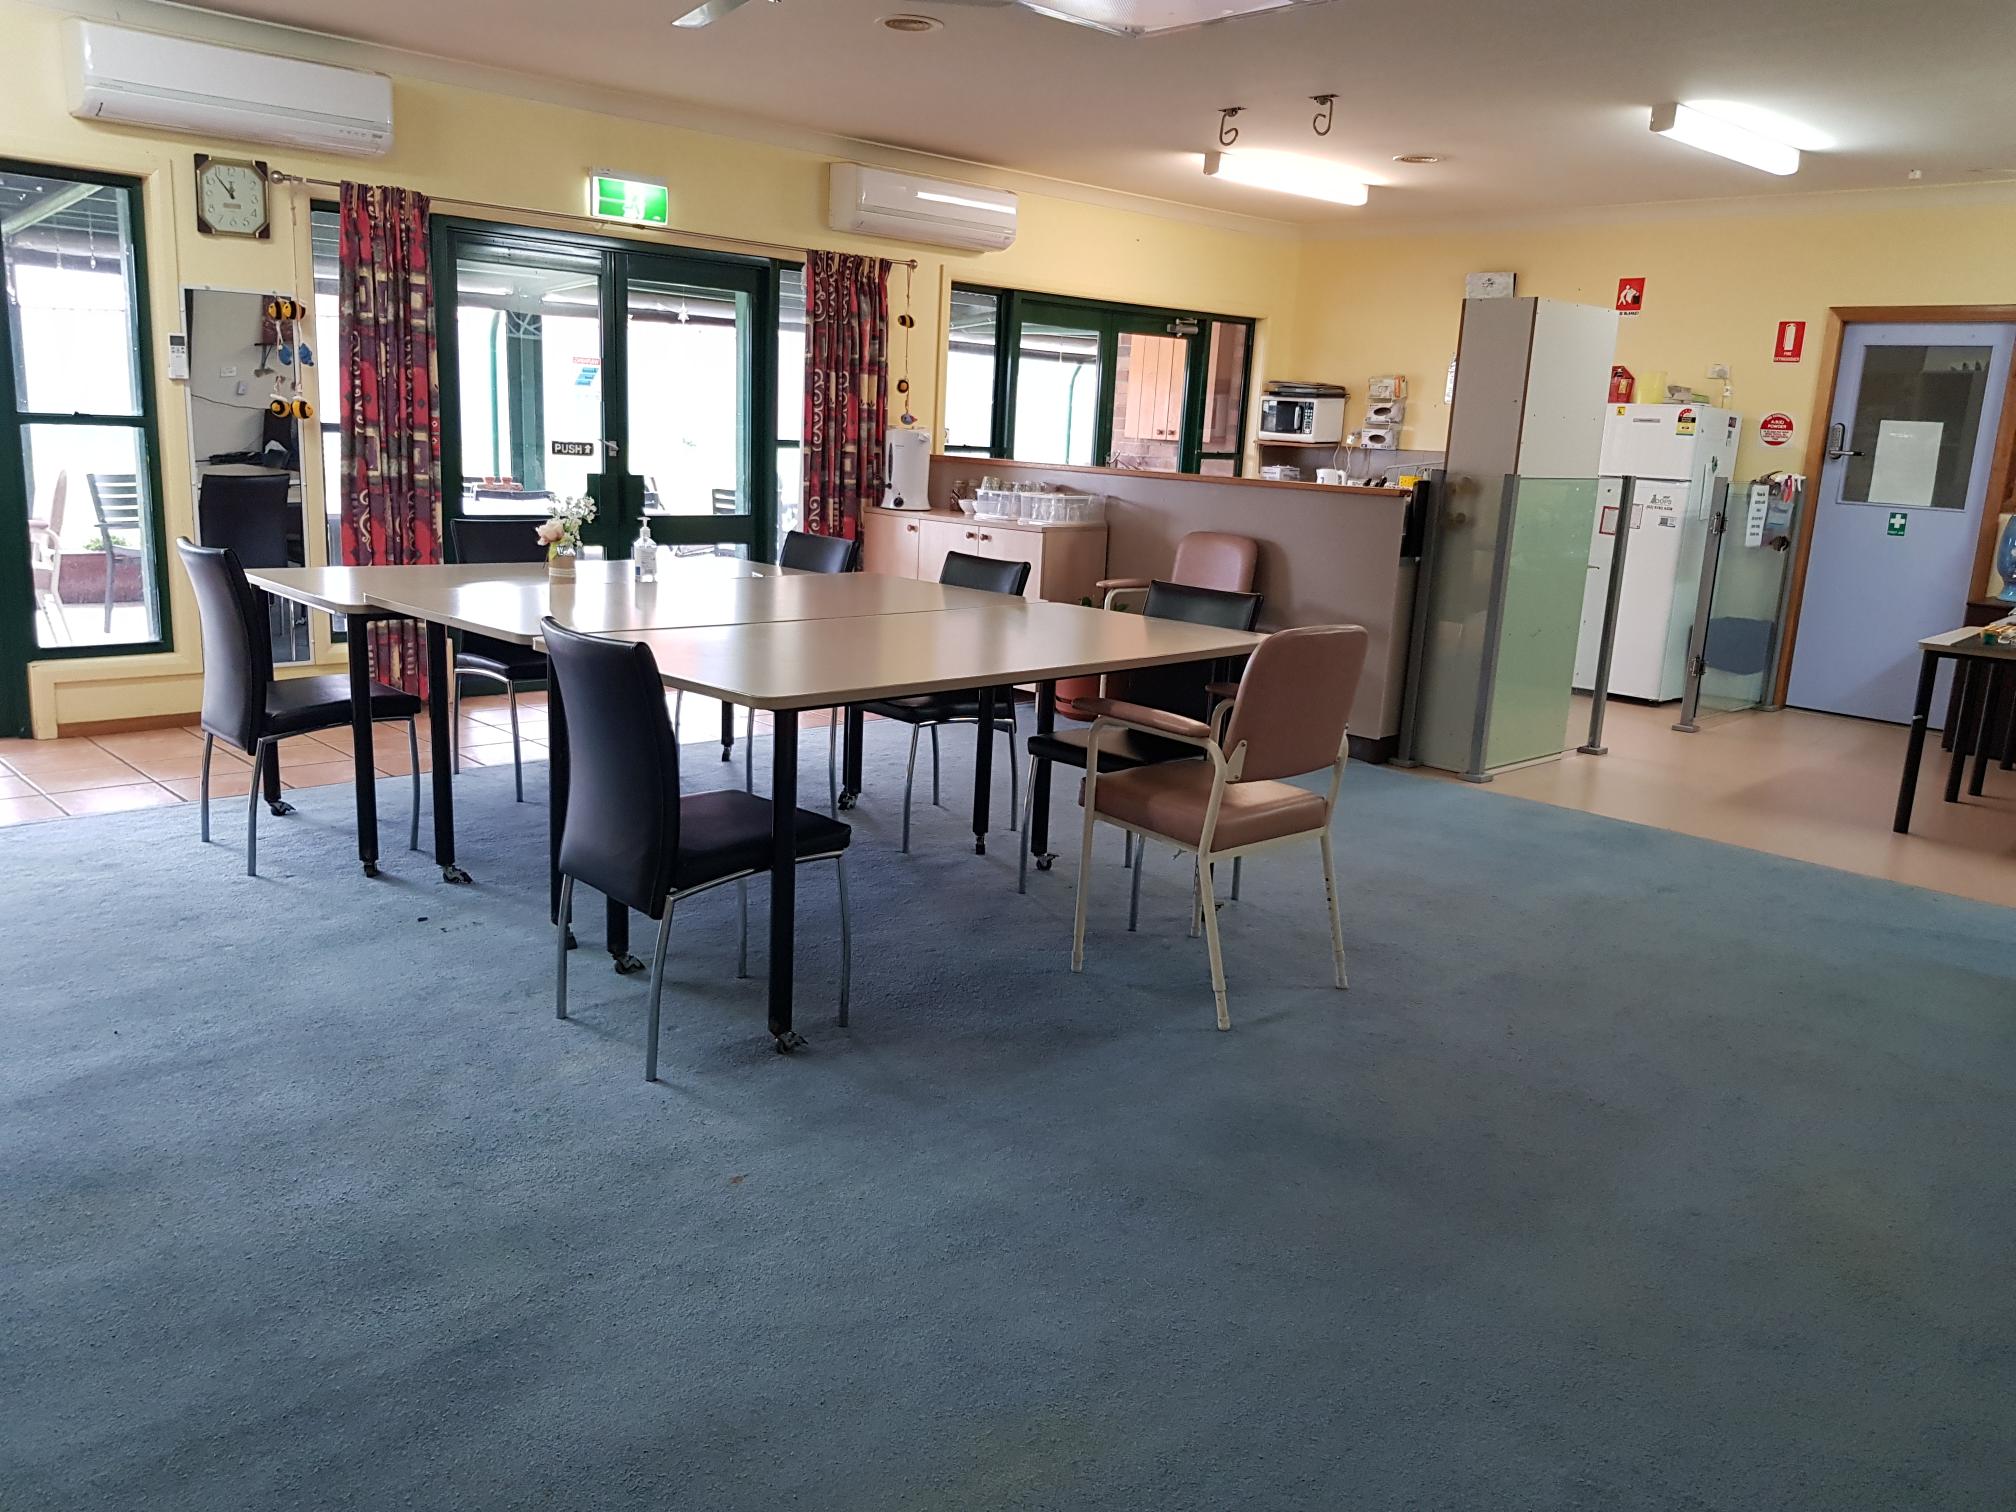 Life Choices - Support Services Activity Room One